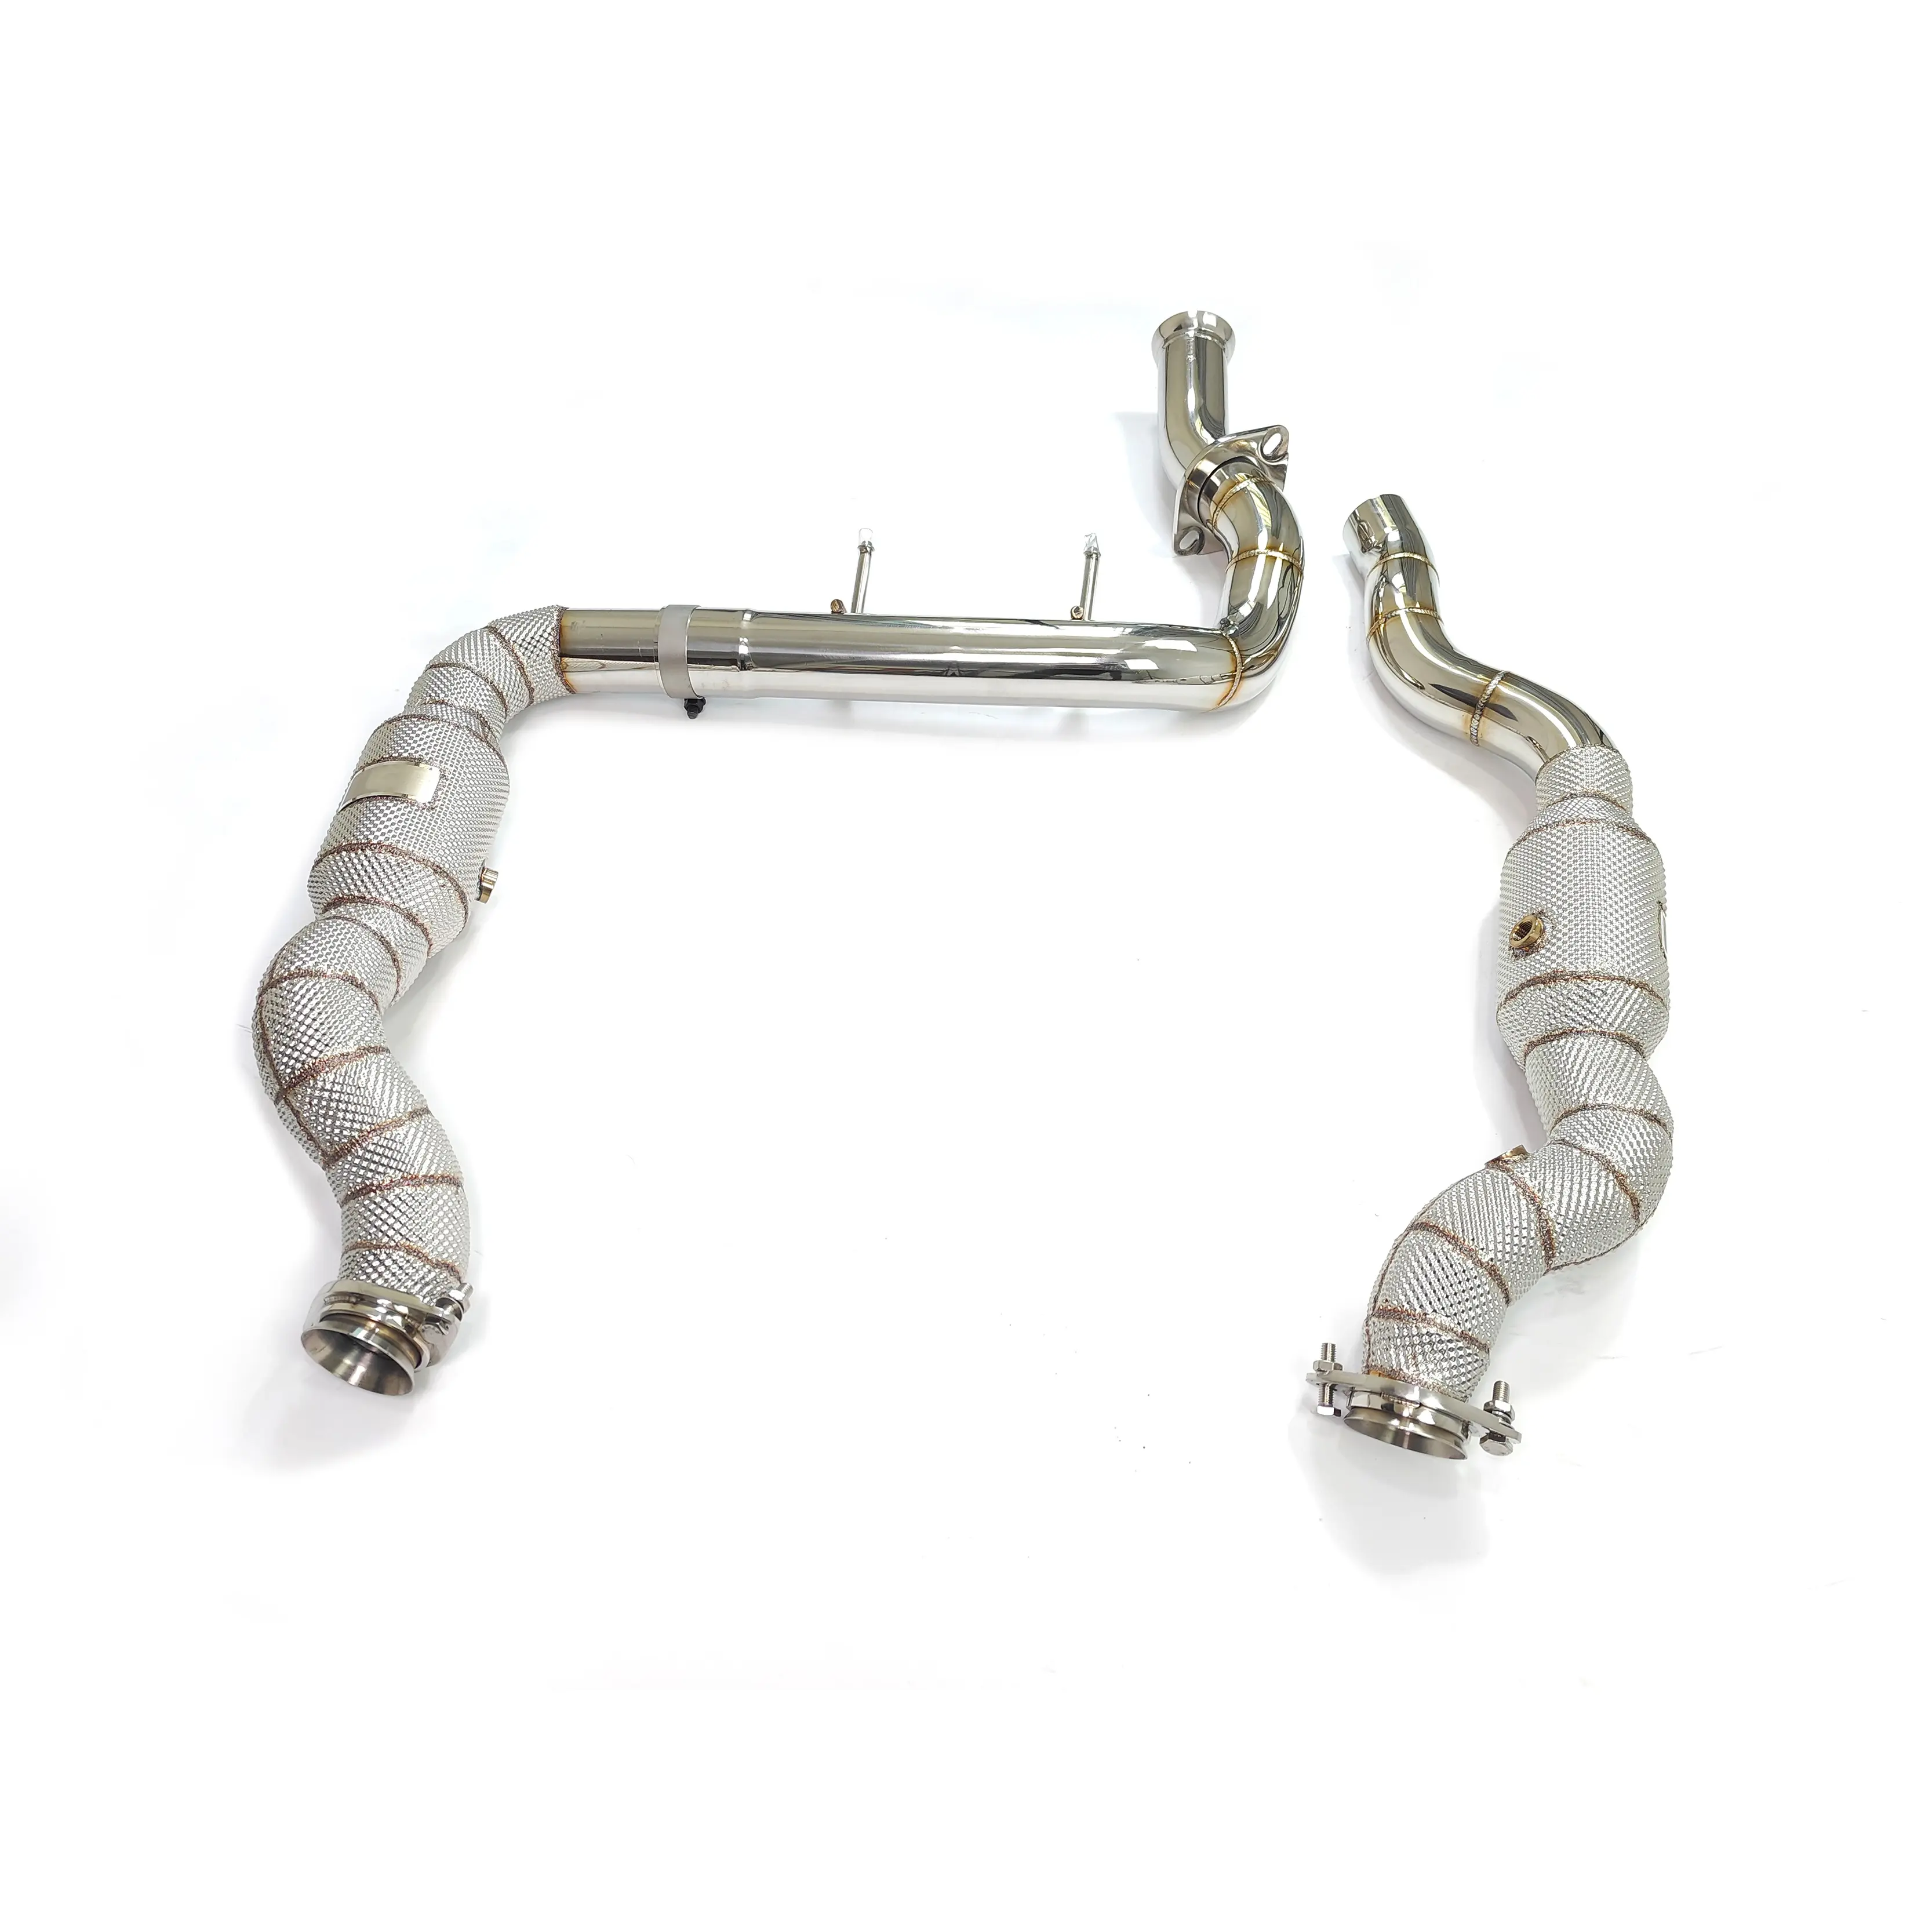 CSZ high flow catted downpie for Ford SVT Raptor F150 3.5TT exhaust sport cat downpipes with heat shield